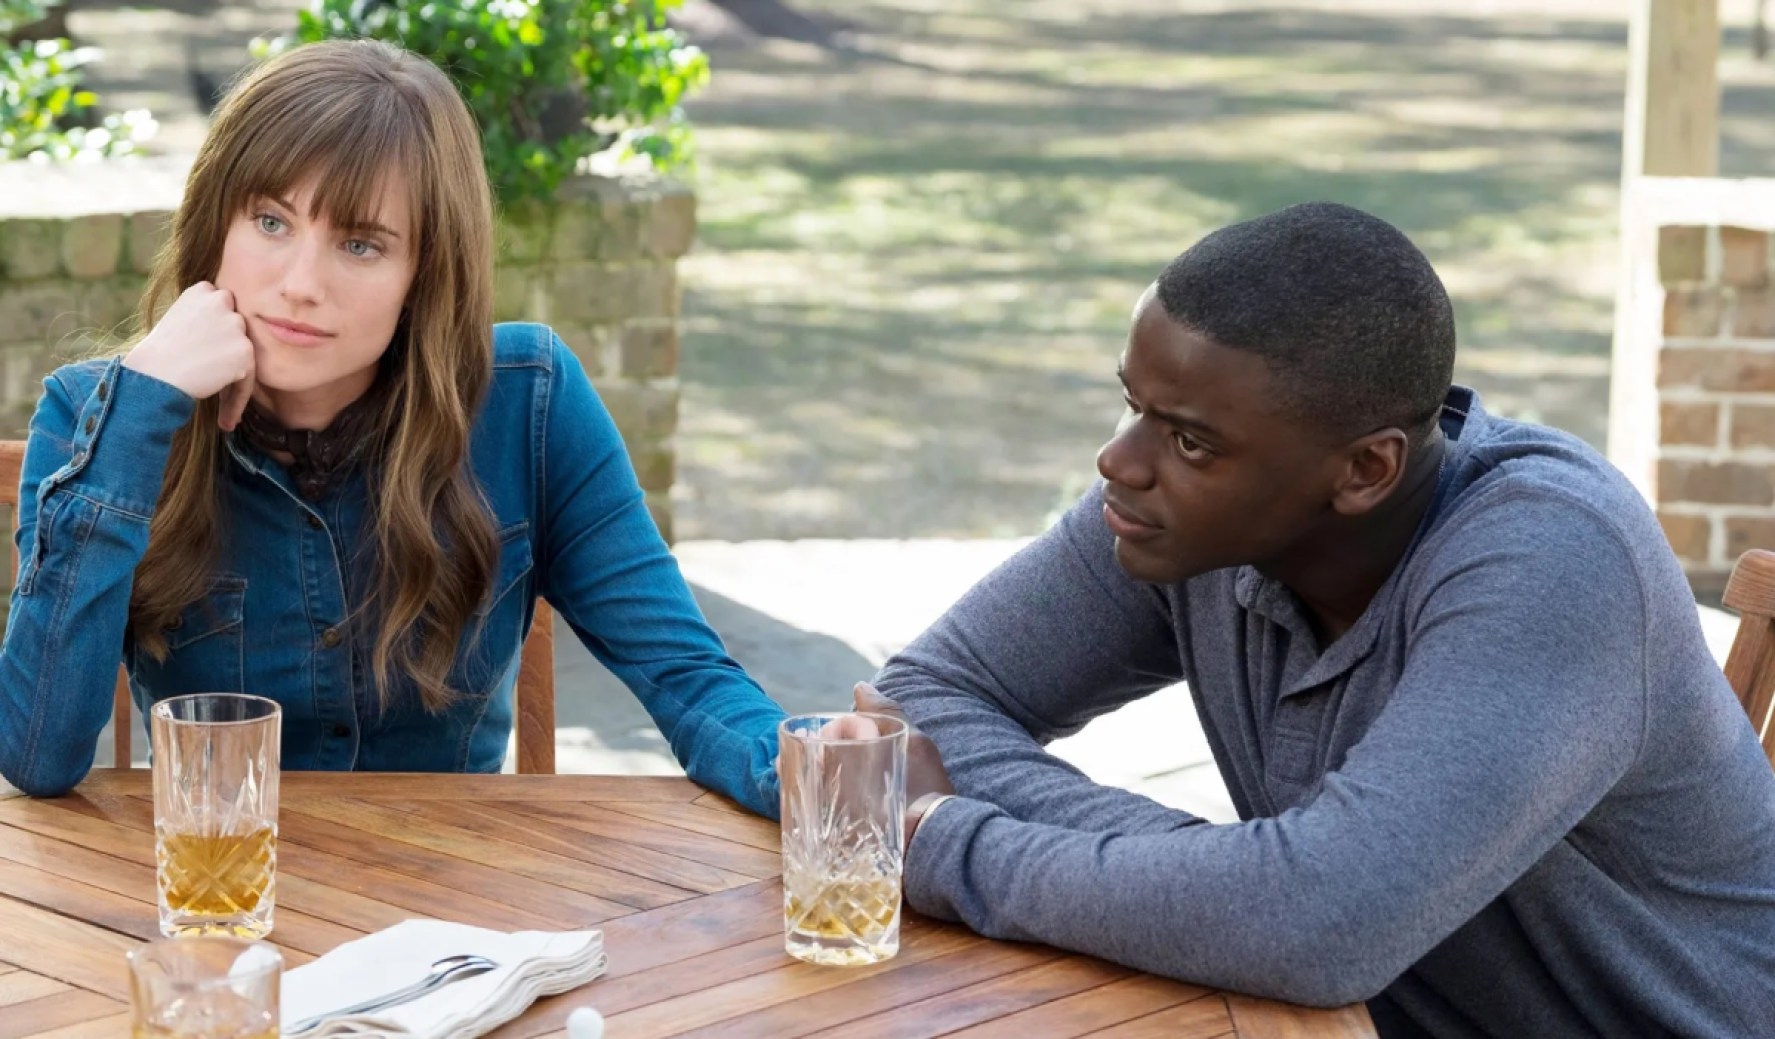 Allison Williams and Daniel Kaluuya sit together in a scene from 'Get Out'